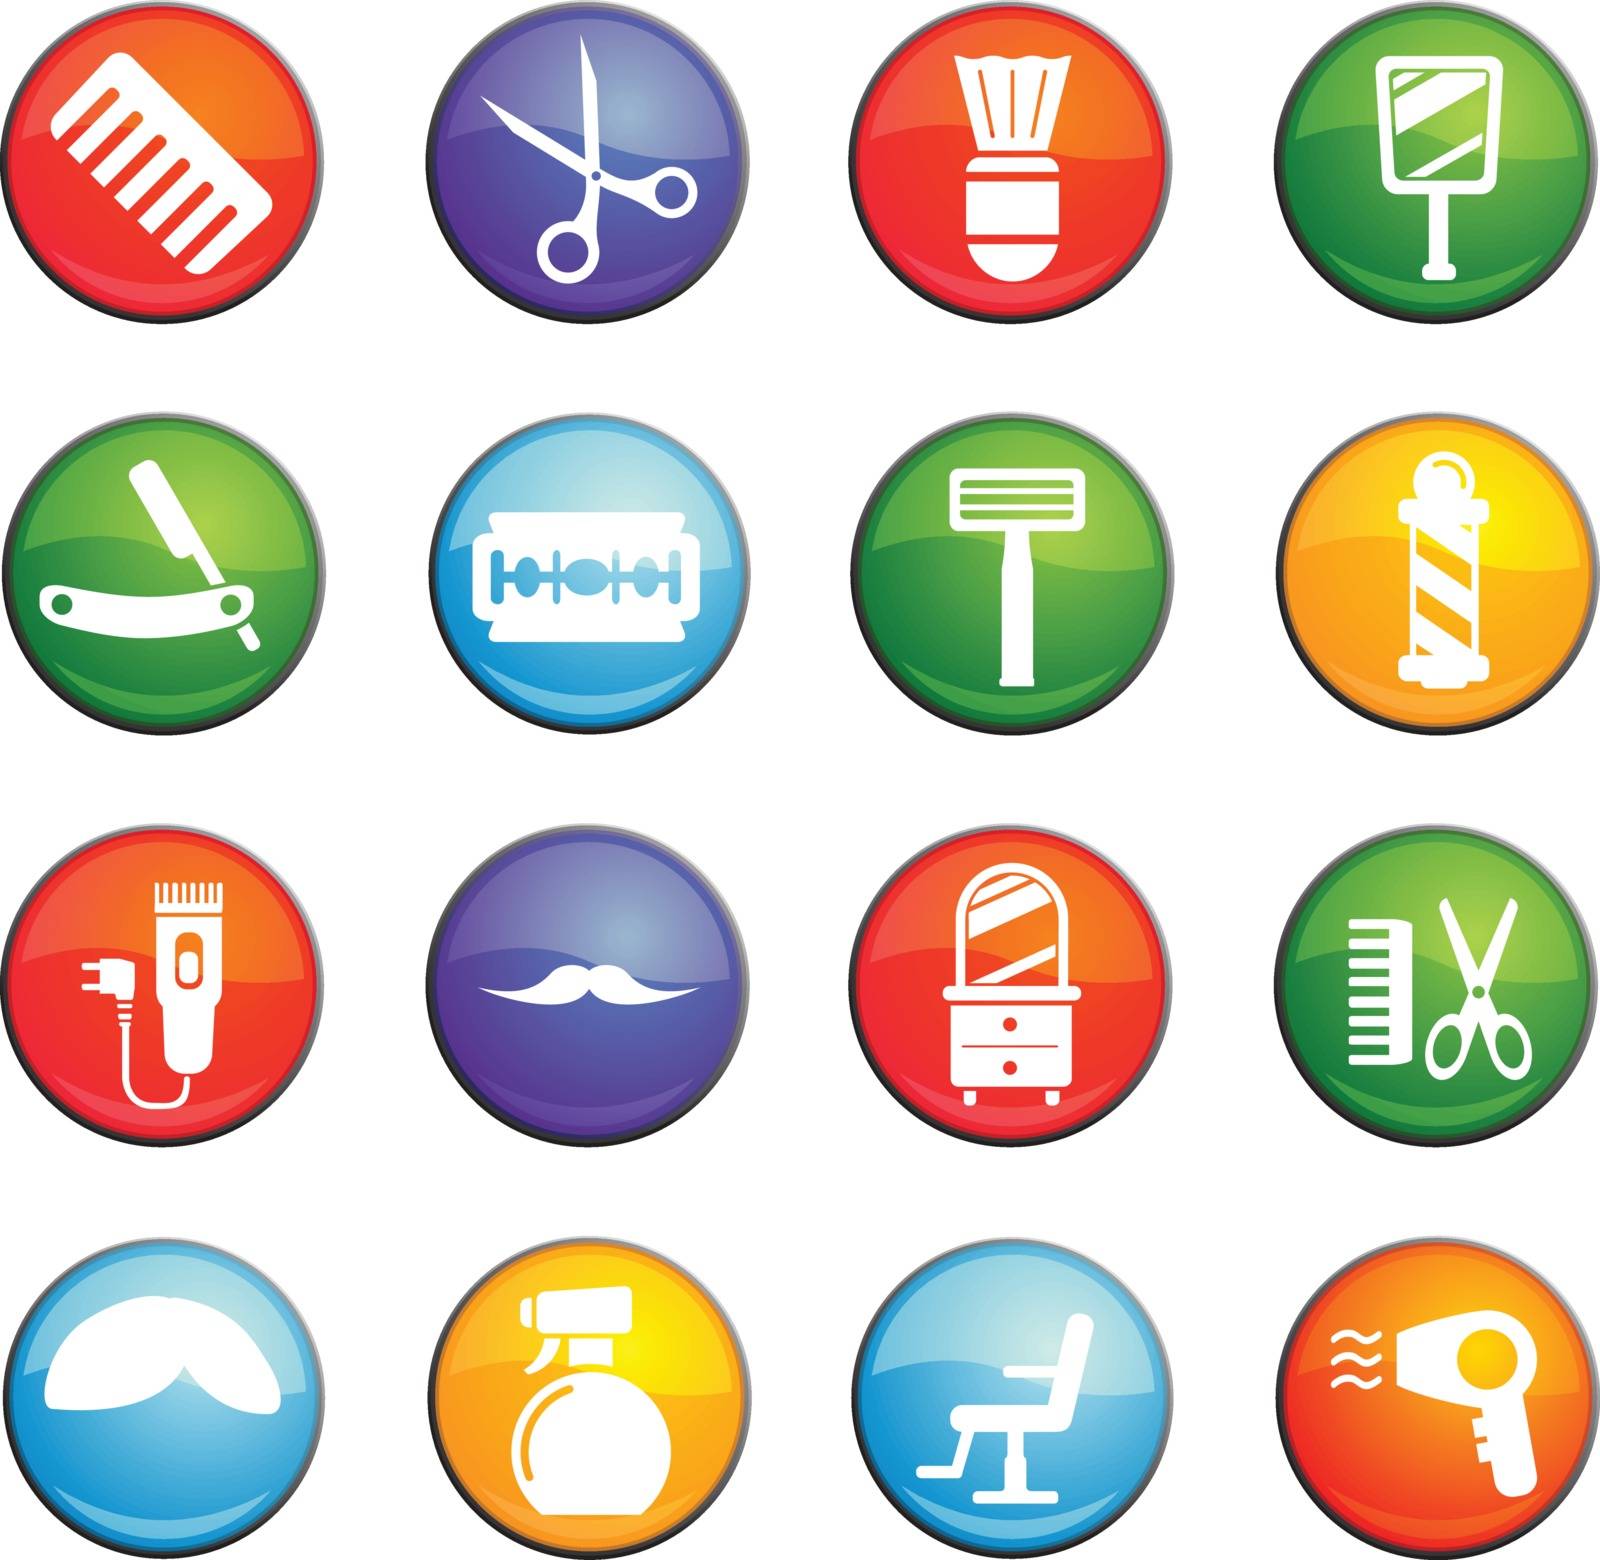 barbershop vector icons for user interface design